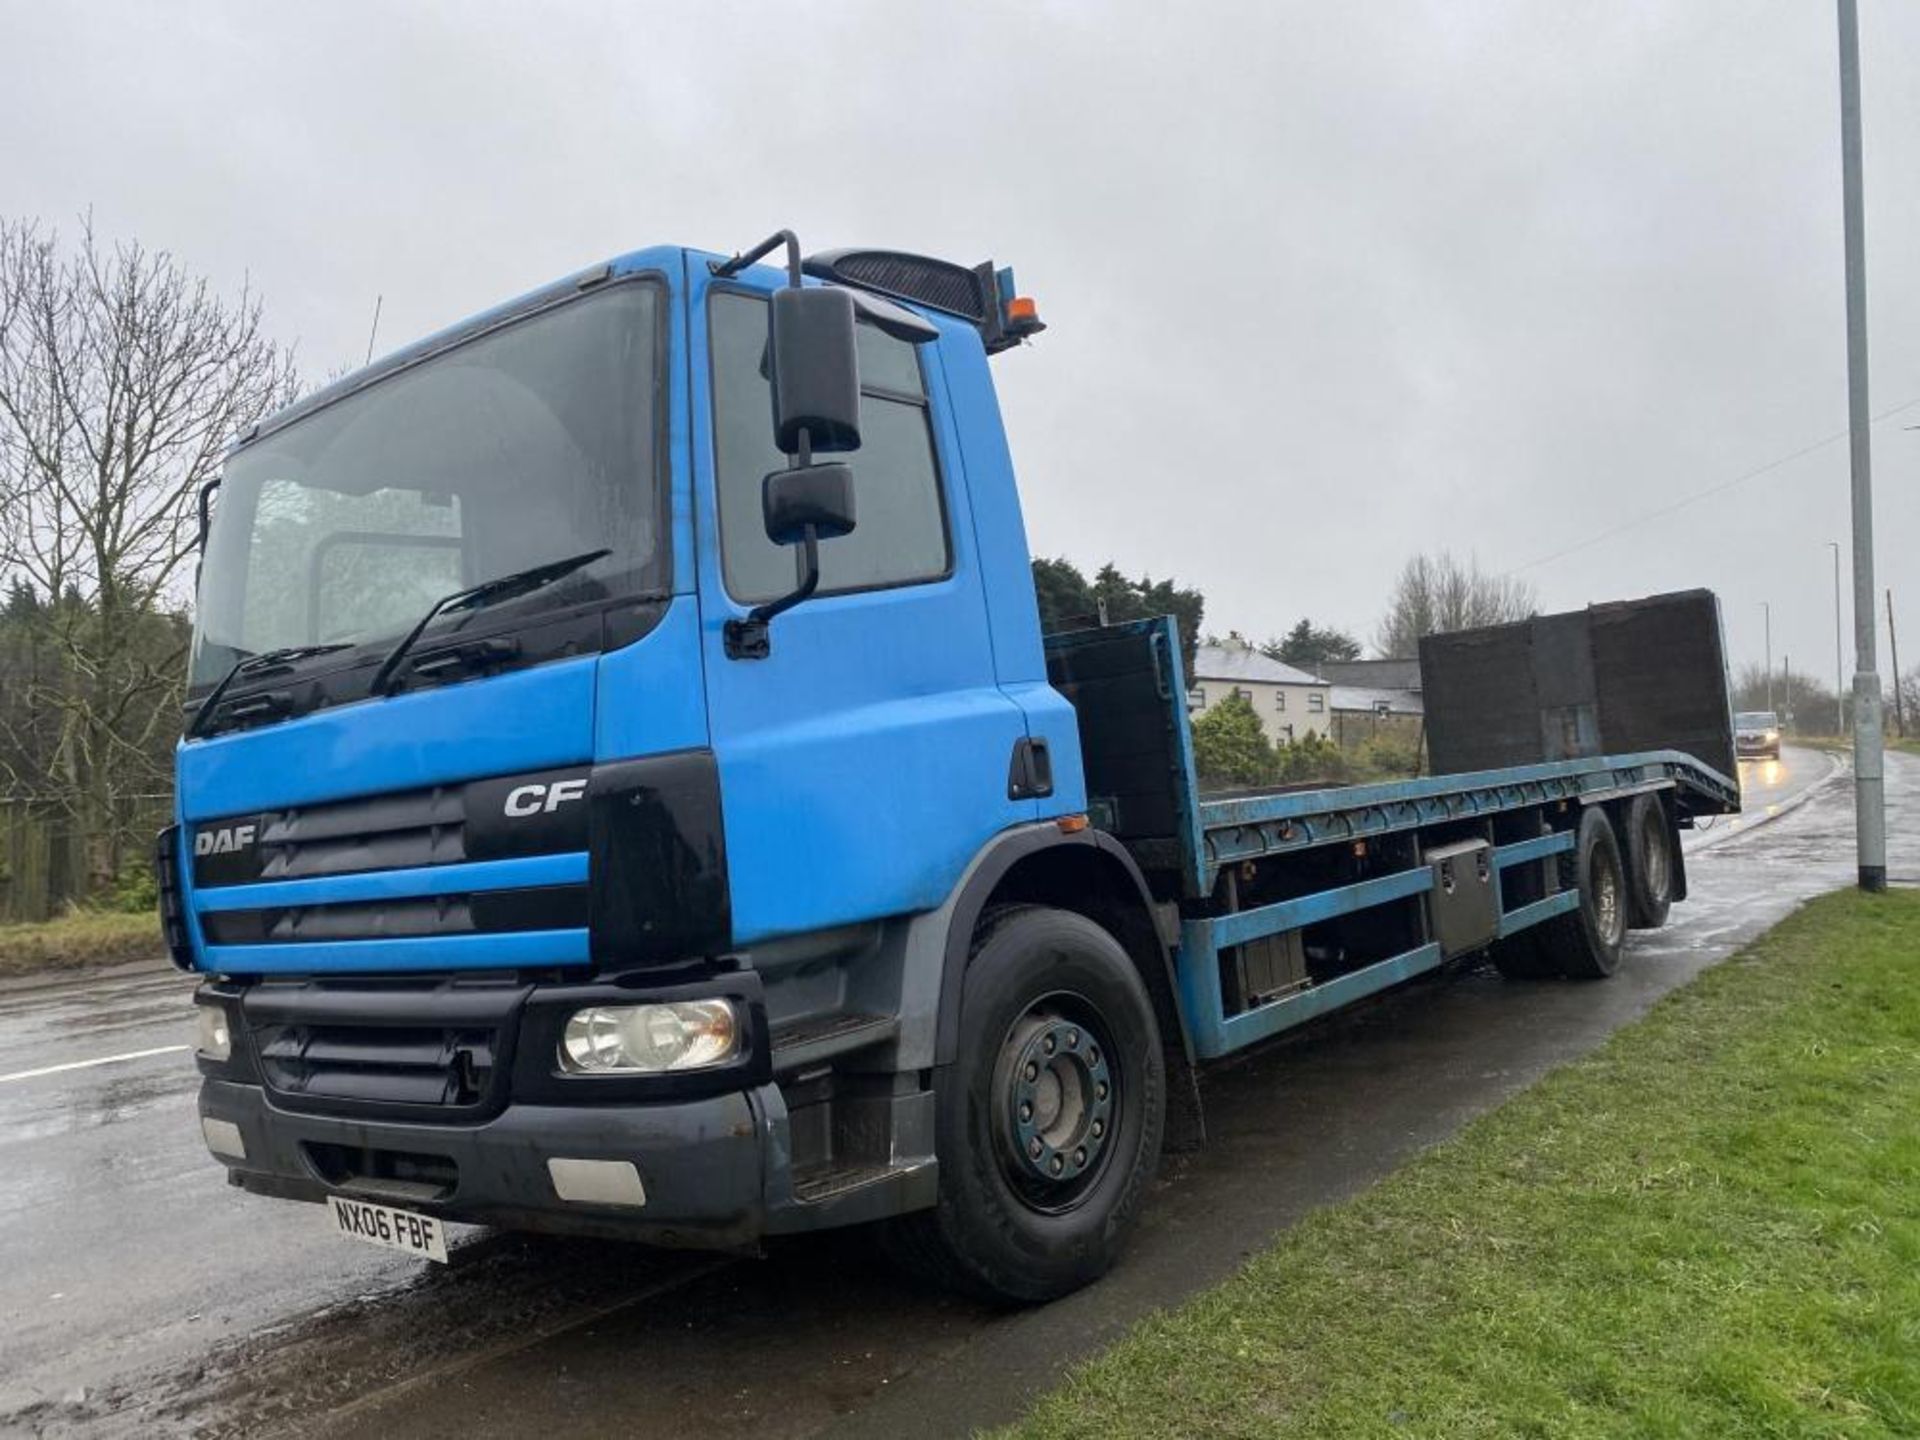 DAF 75 6X2 BEAVERTAIL RECOVERY